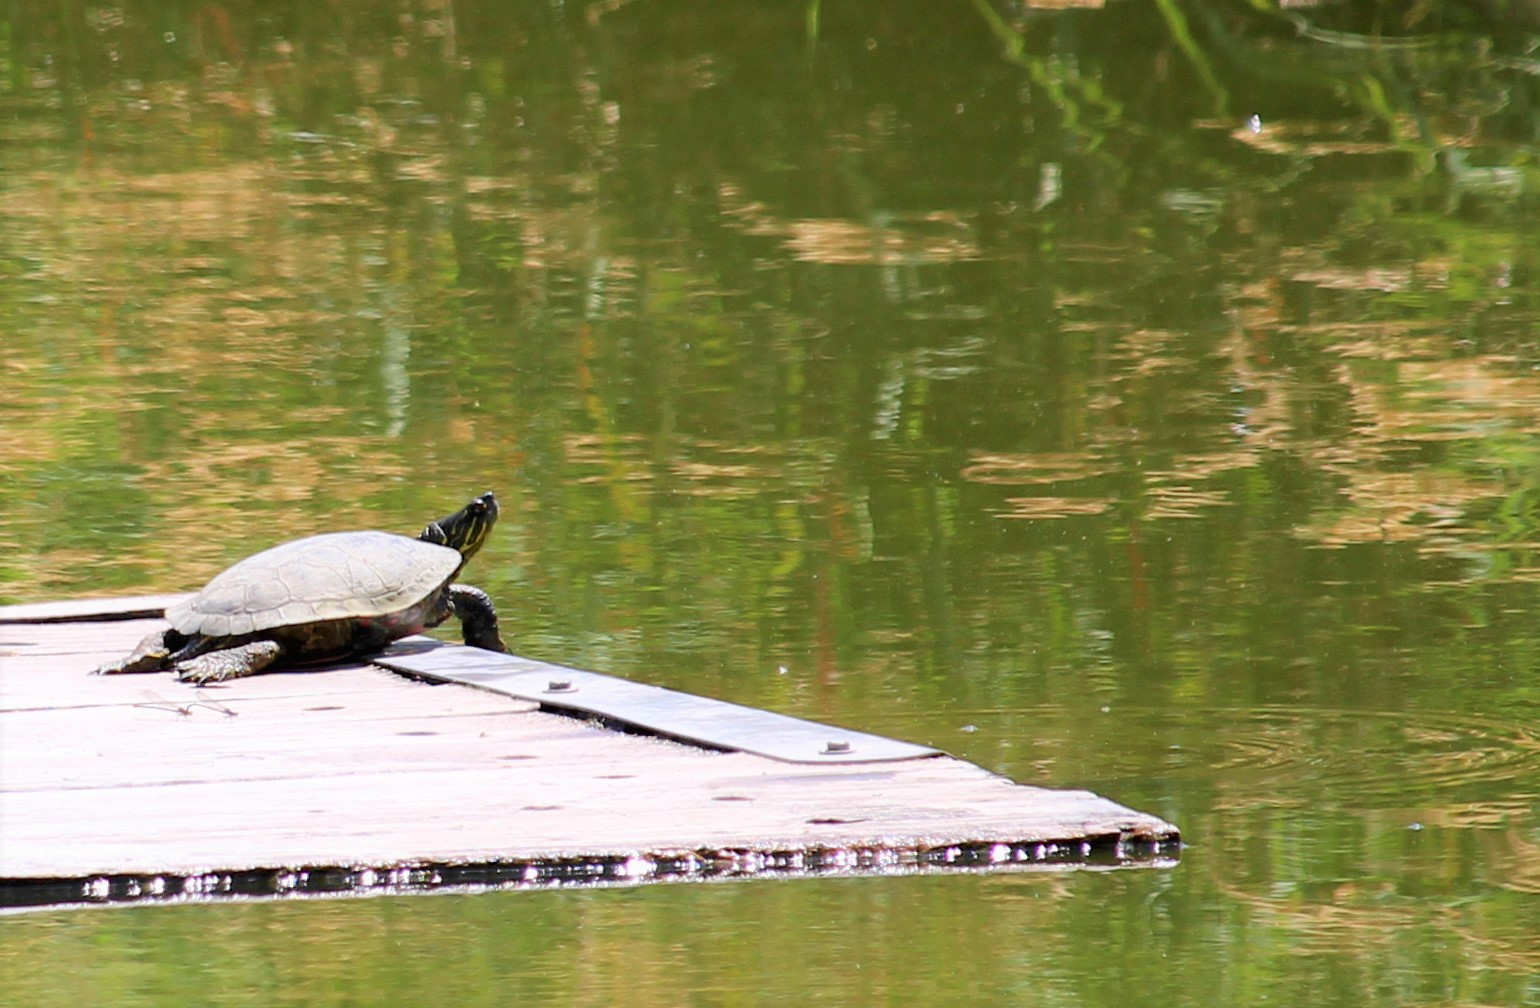 A turtle sits on a floating plank of wood on a greenish pond.